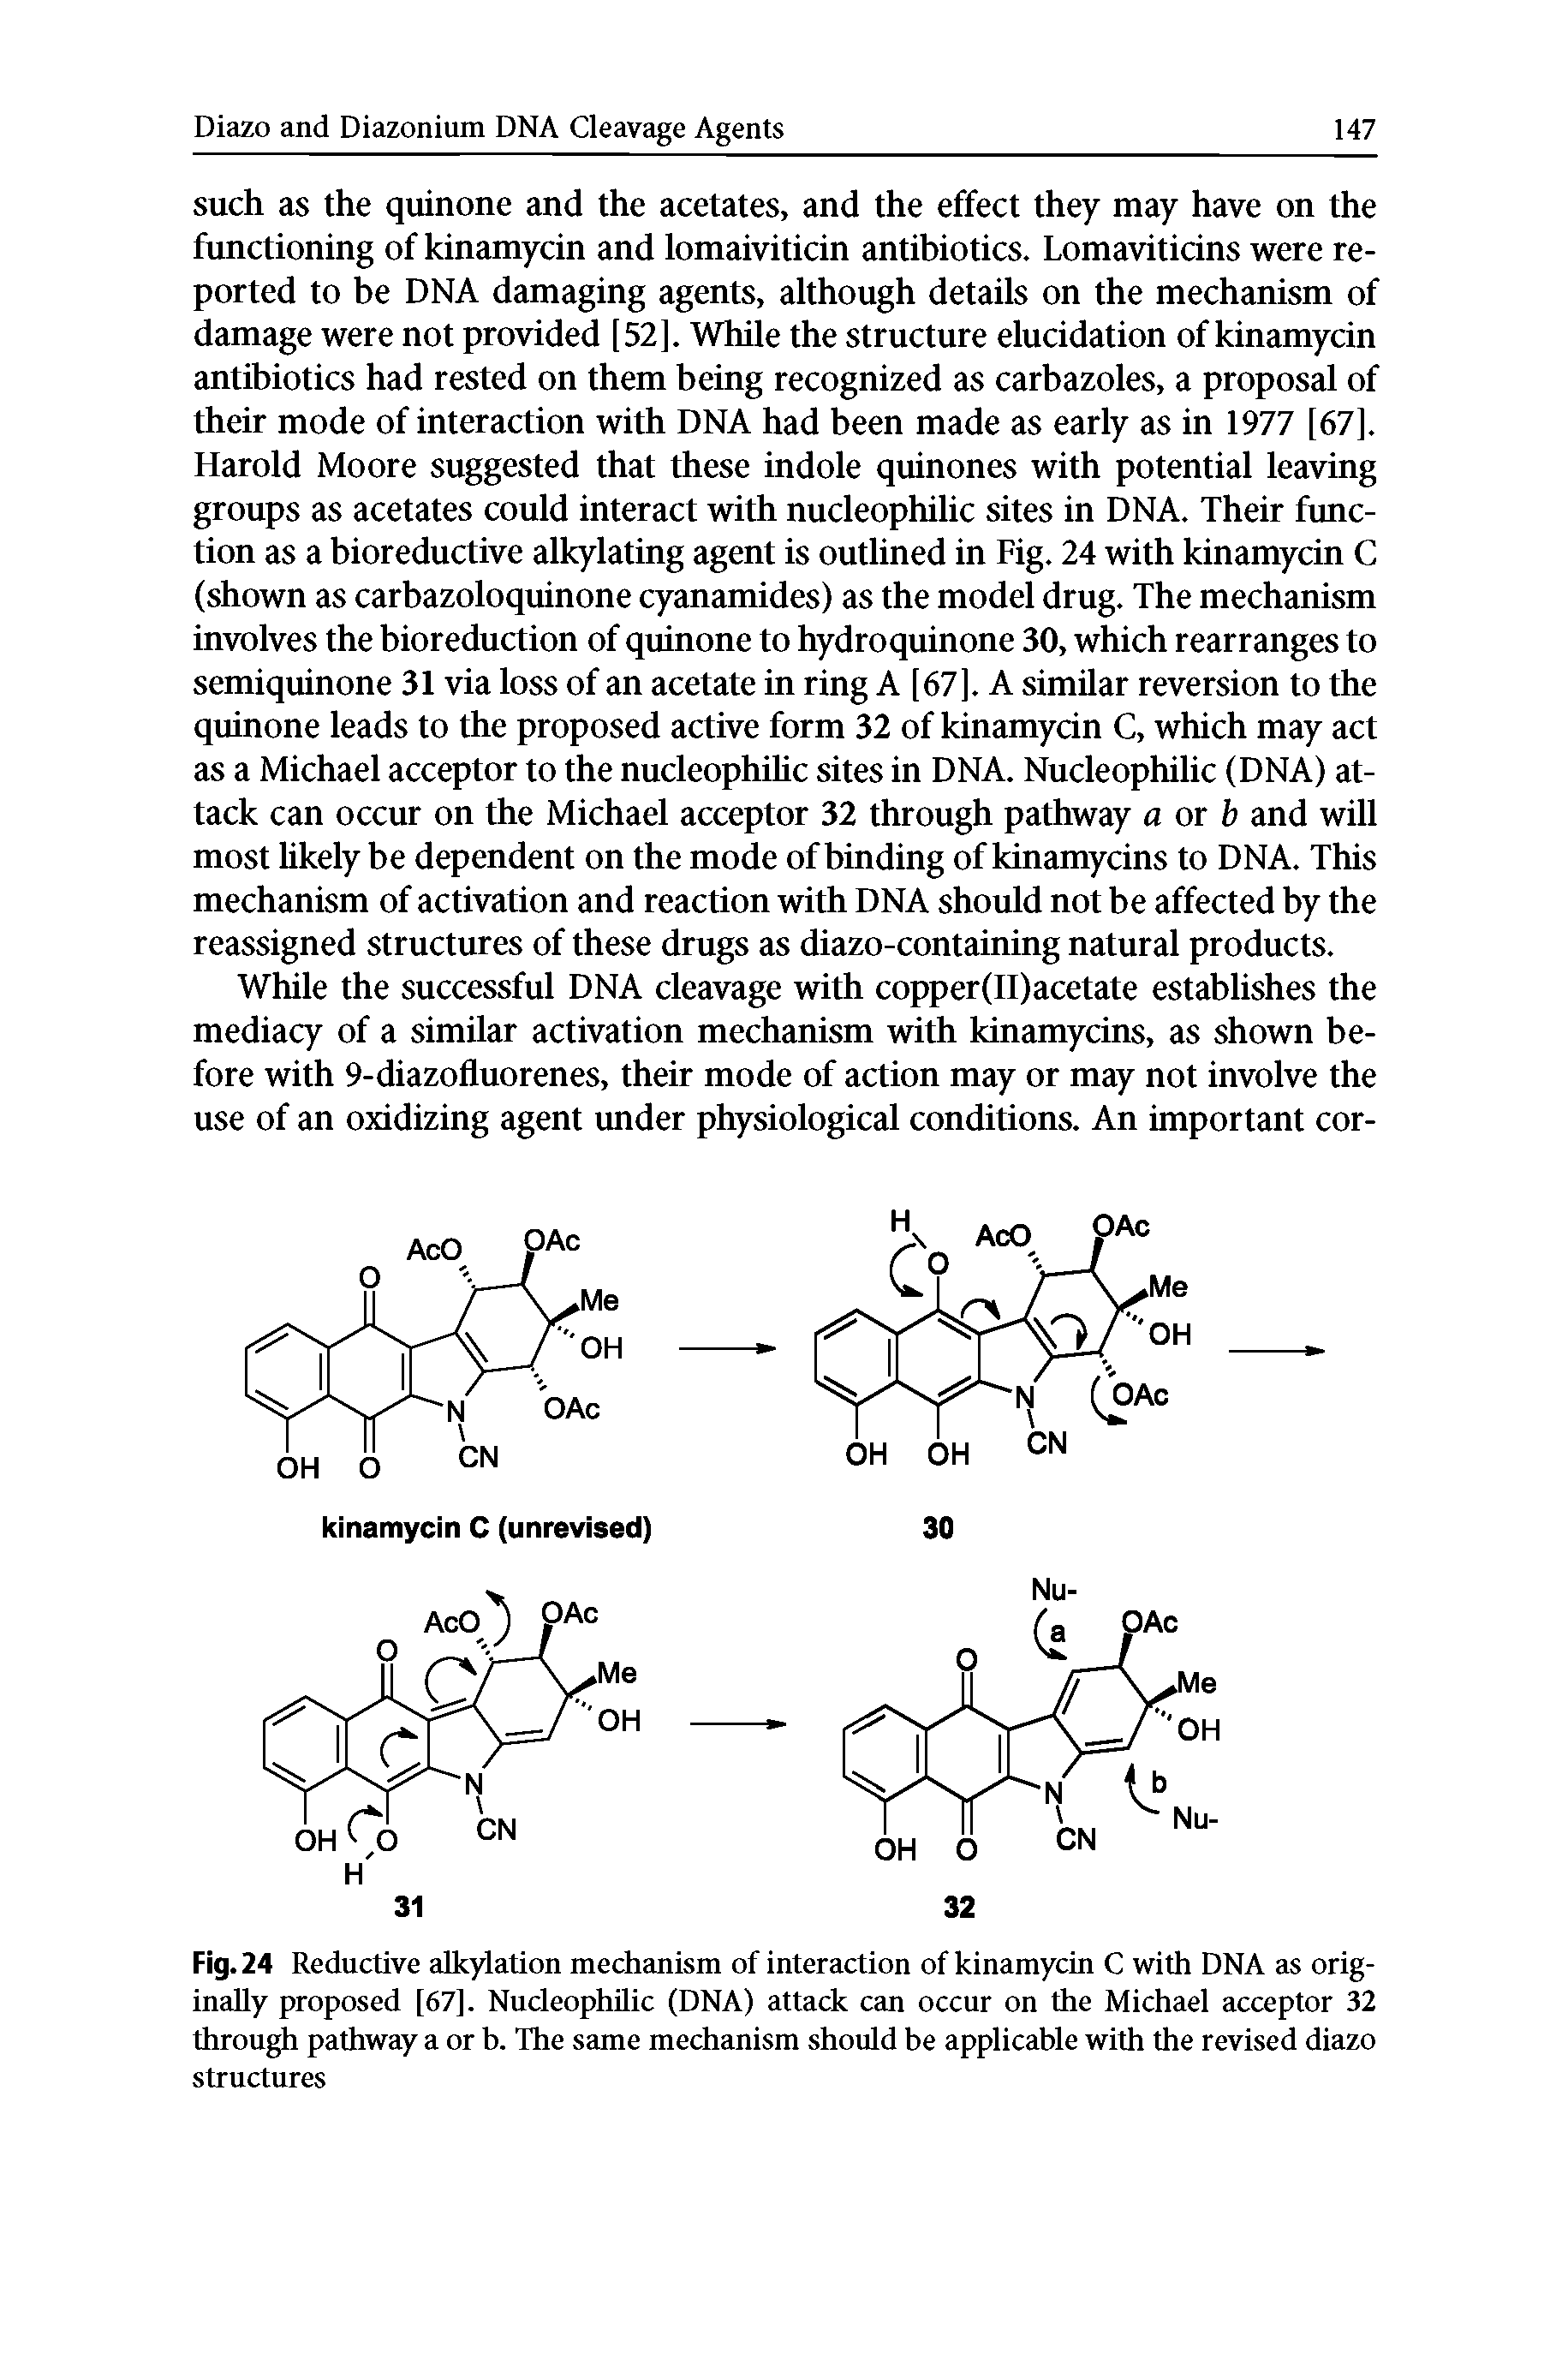 Fig. 24 Reductive alkylation mechanism of interaction of kinamycin C with DNA as originally proposed [67], Nucleophilic (DNA) attack can occur on the Michael acceptor 32 through pathway a or b. The same mechanism should be applicable with the revised diazo structures...